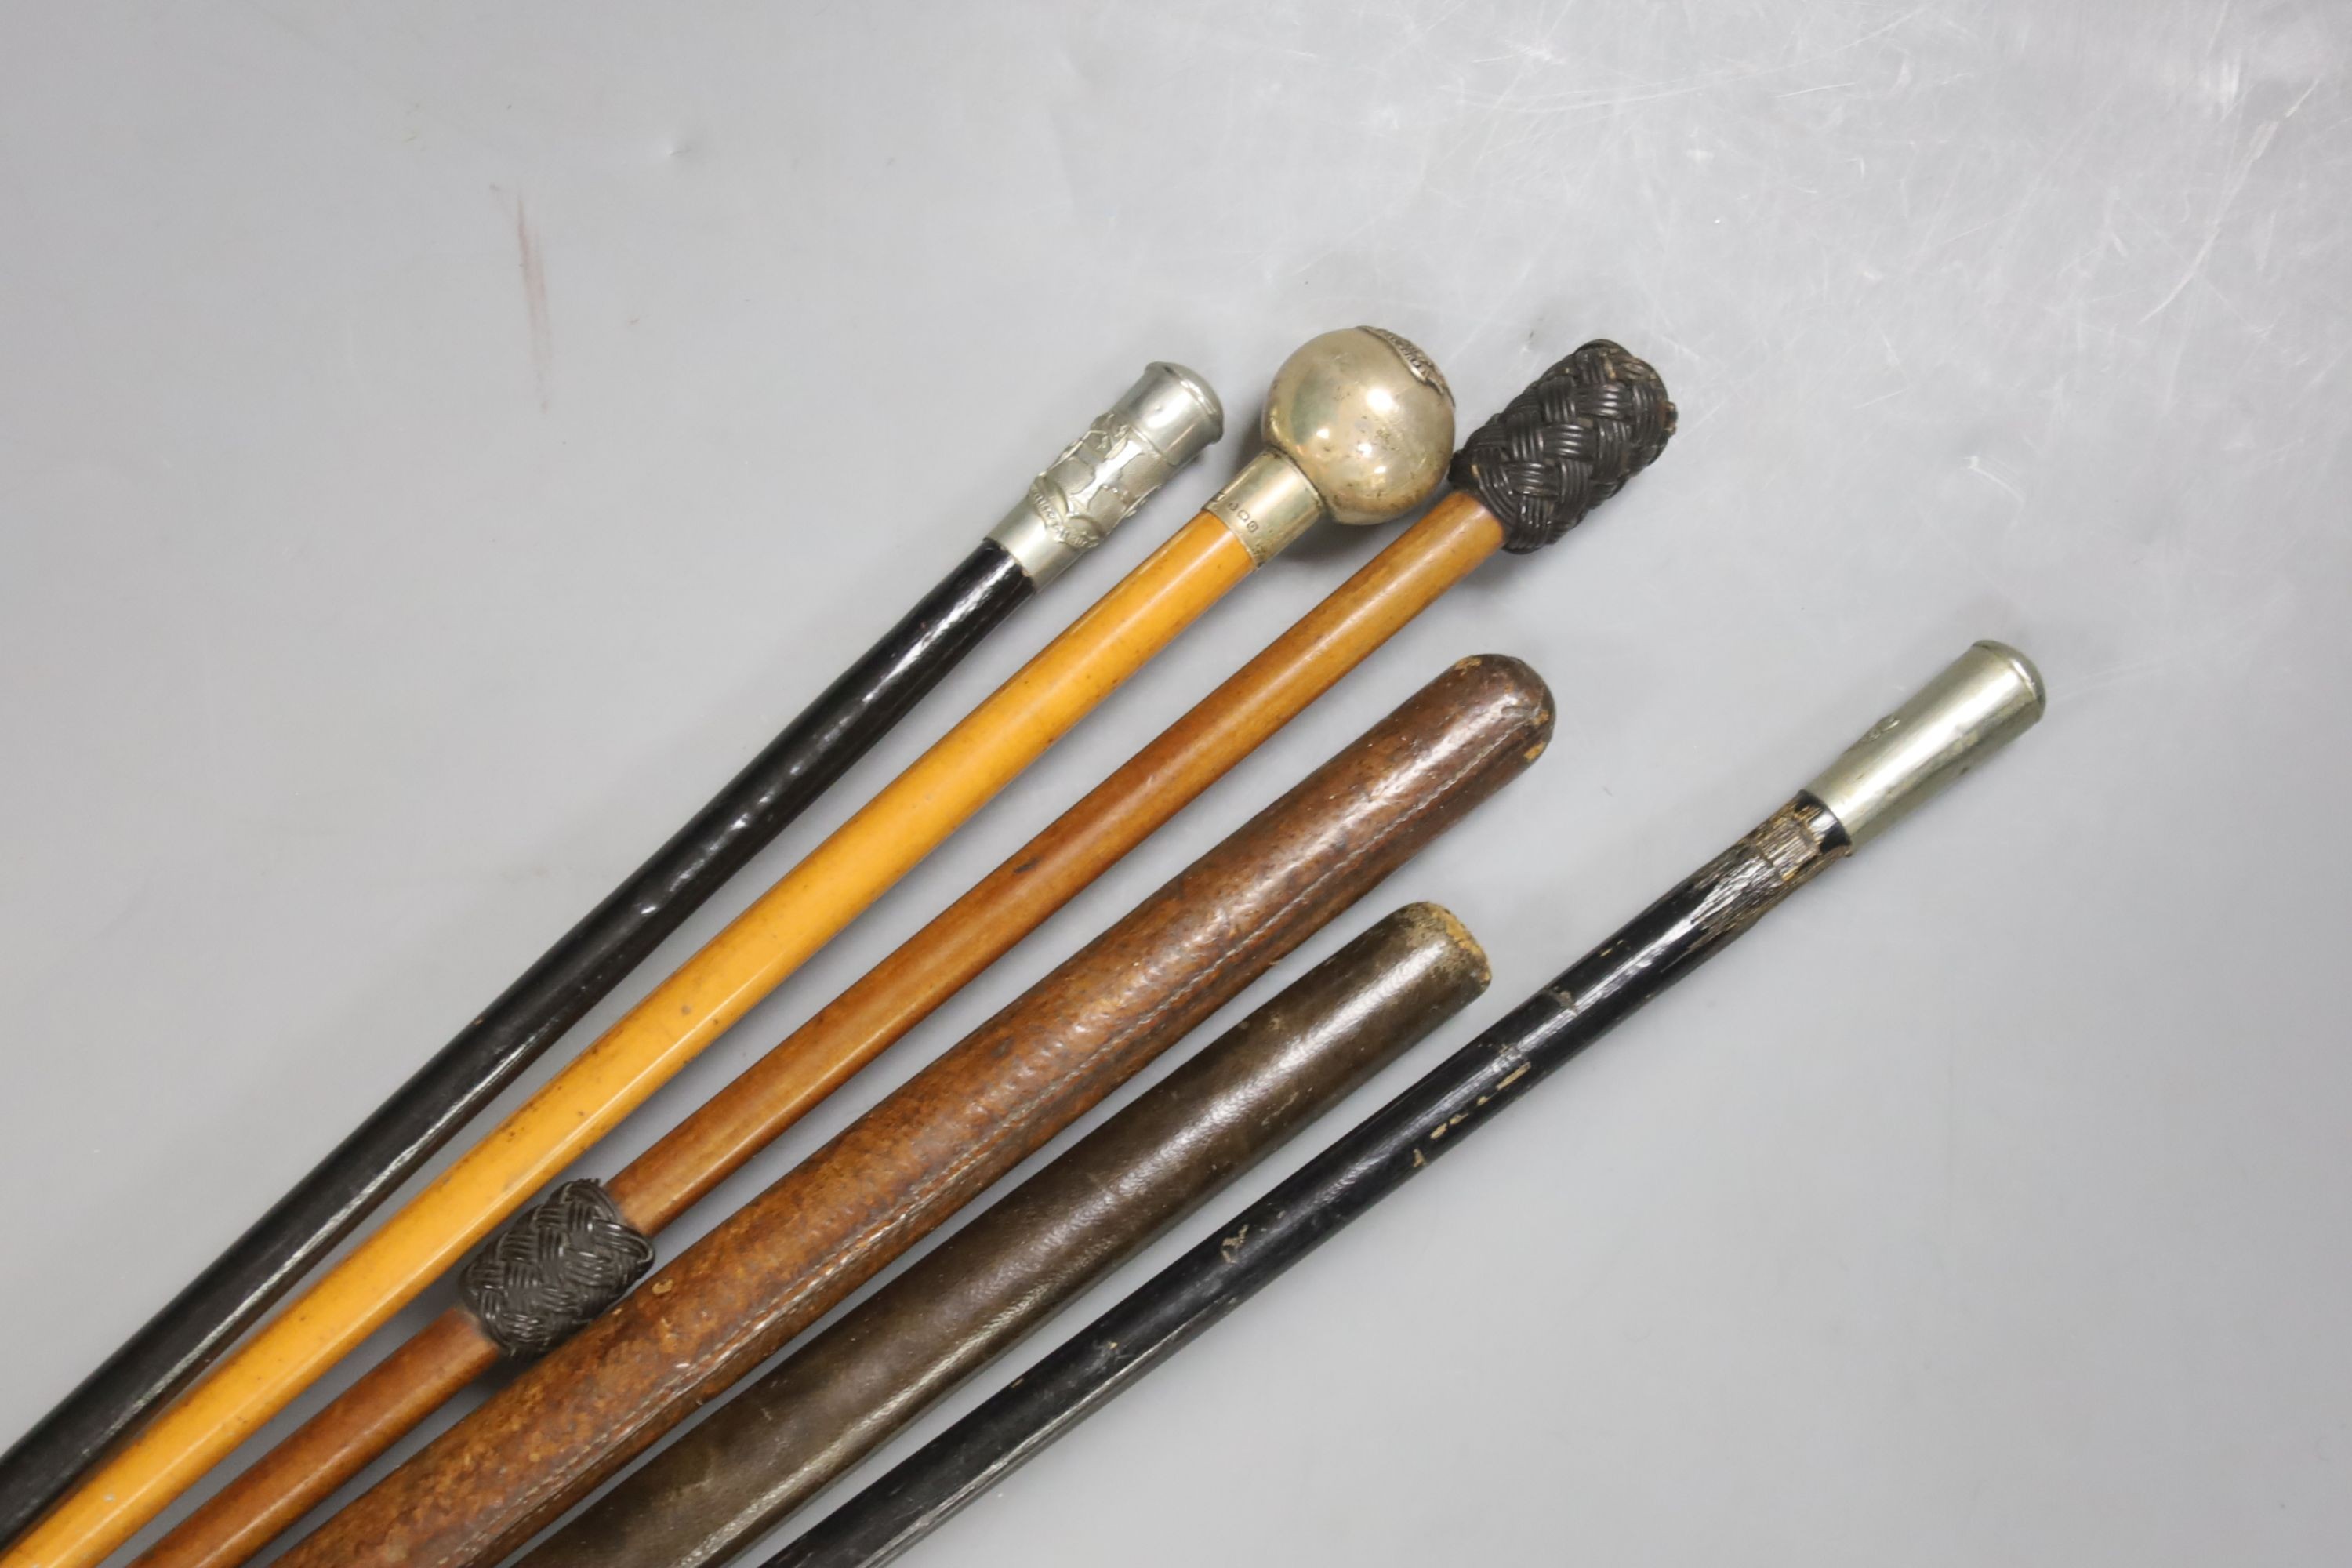 A silver topped RAMC swagger stick, a leather stiletto swagger stick and four other swagger sticks or riding sticks